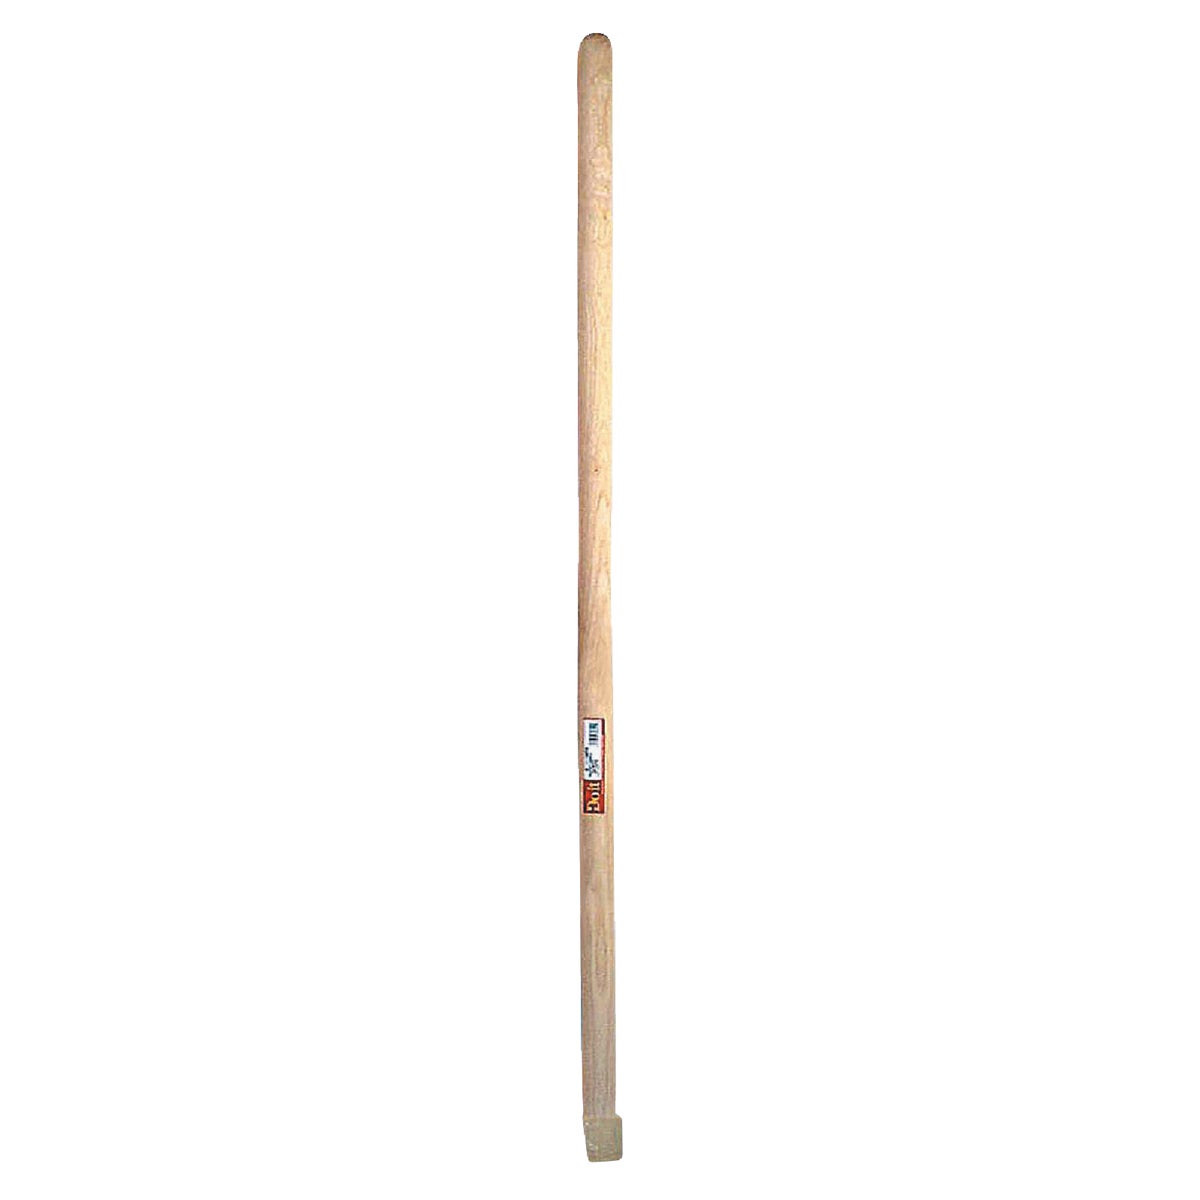 Item 341533, 42" ash handle for Barco Tampers model No.